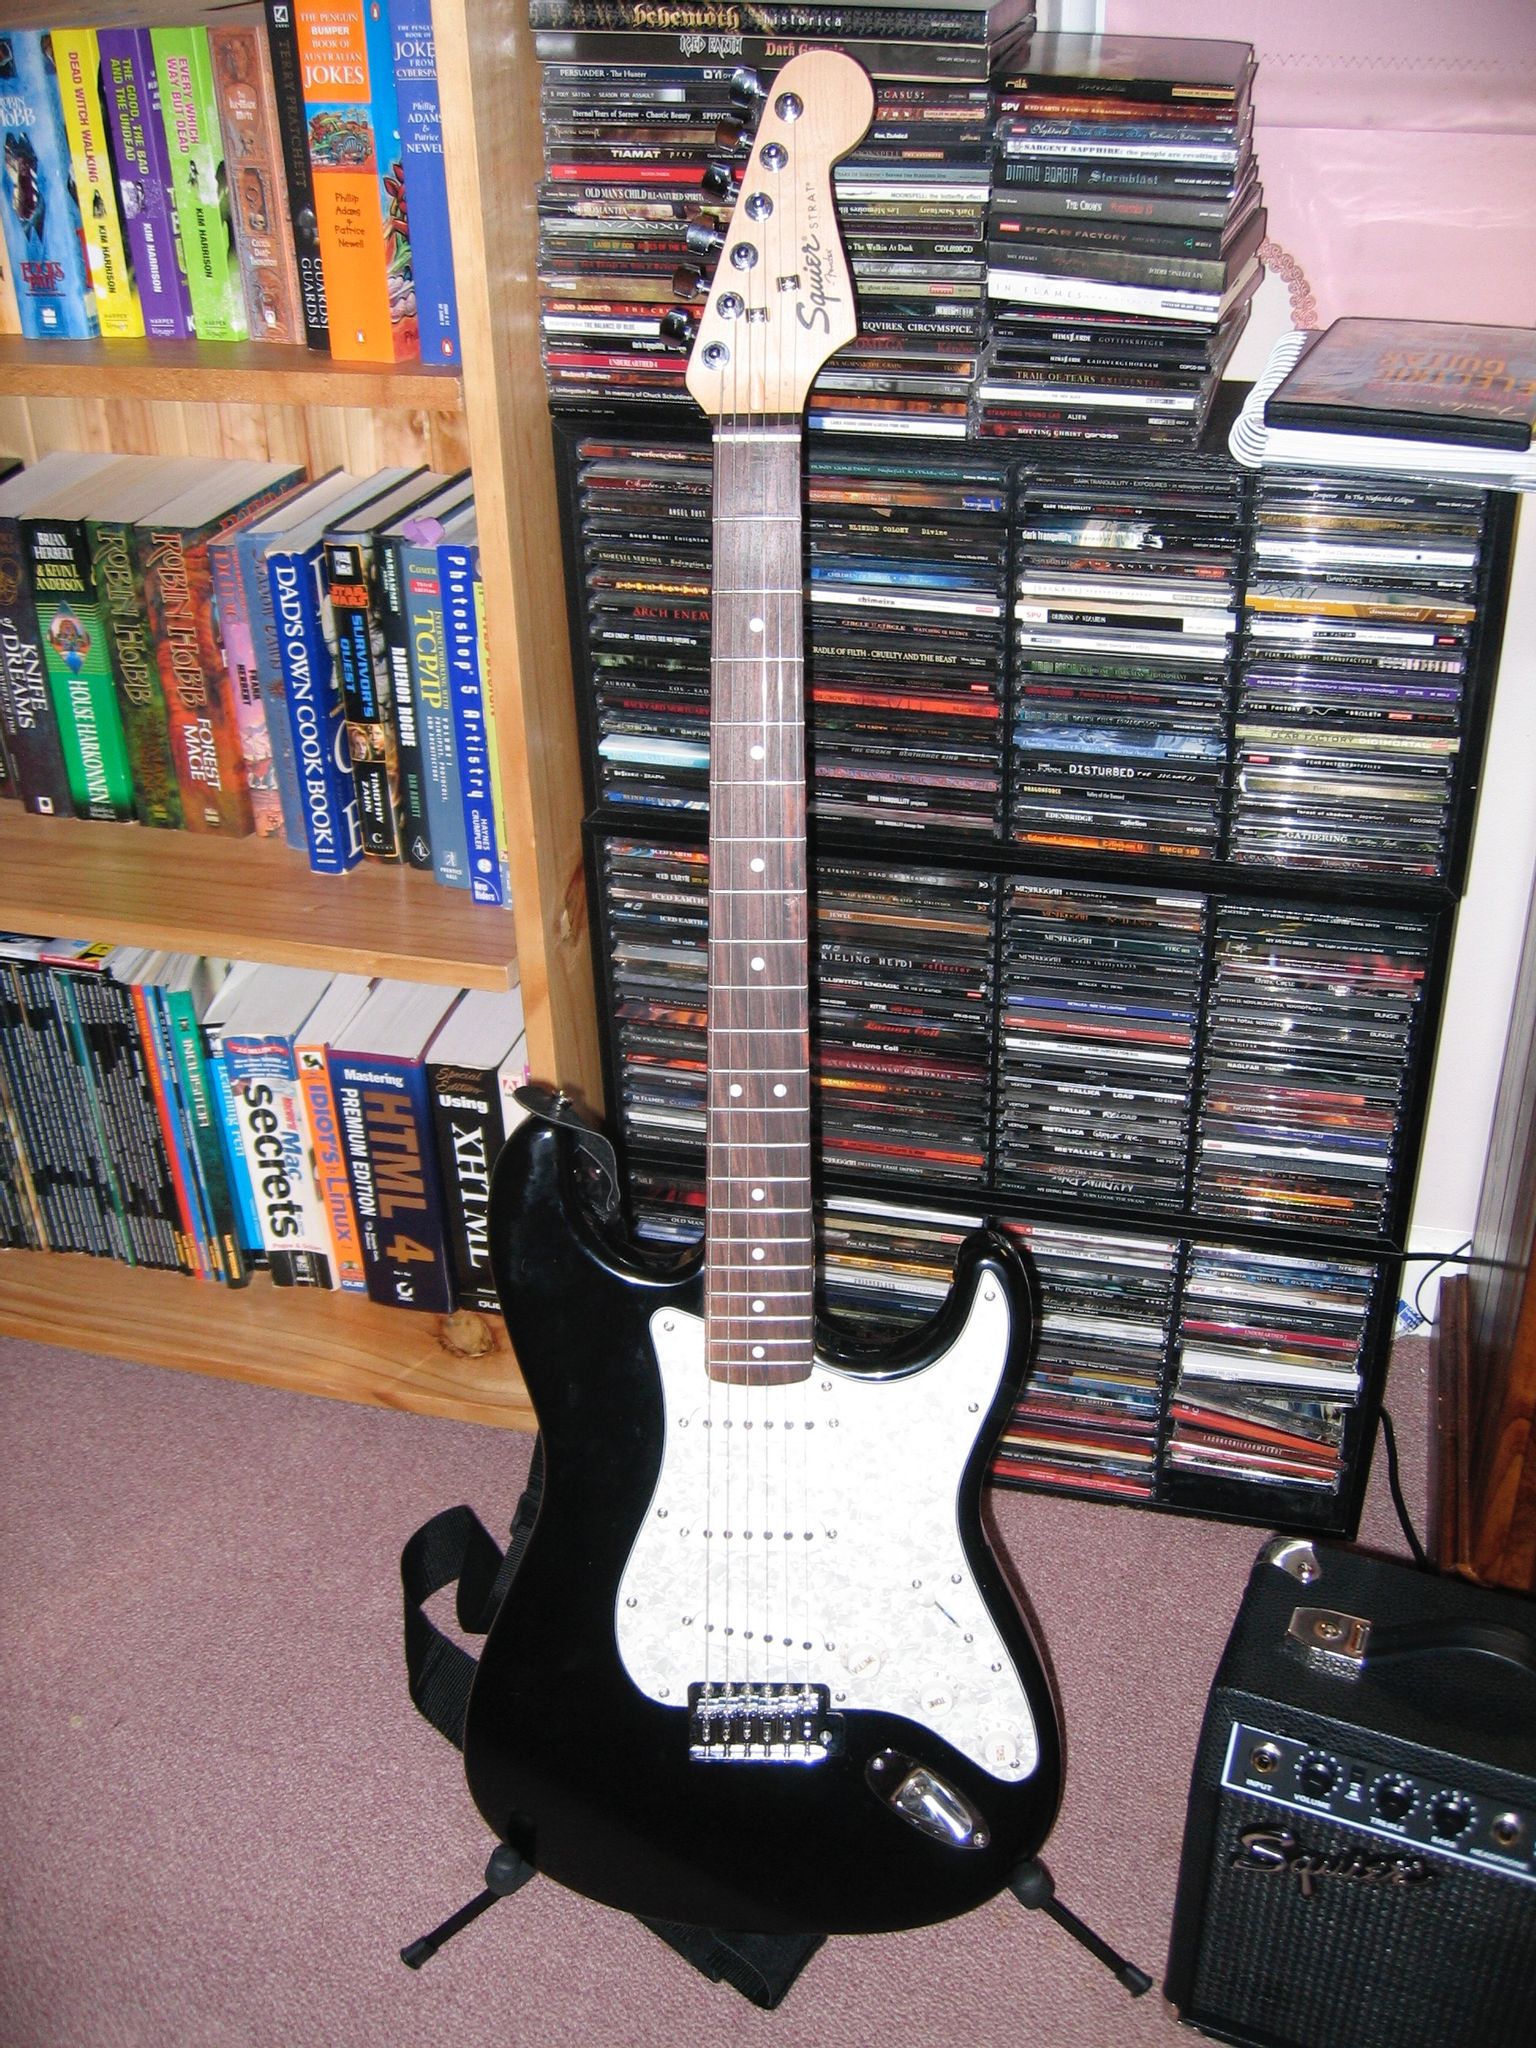 A closeup of a black electric guitar with white scratch plate sitting on a guitar stand, it has a wooden head and a strap attached.